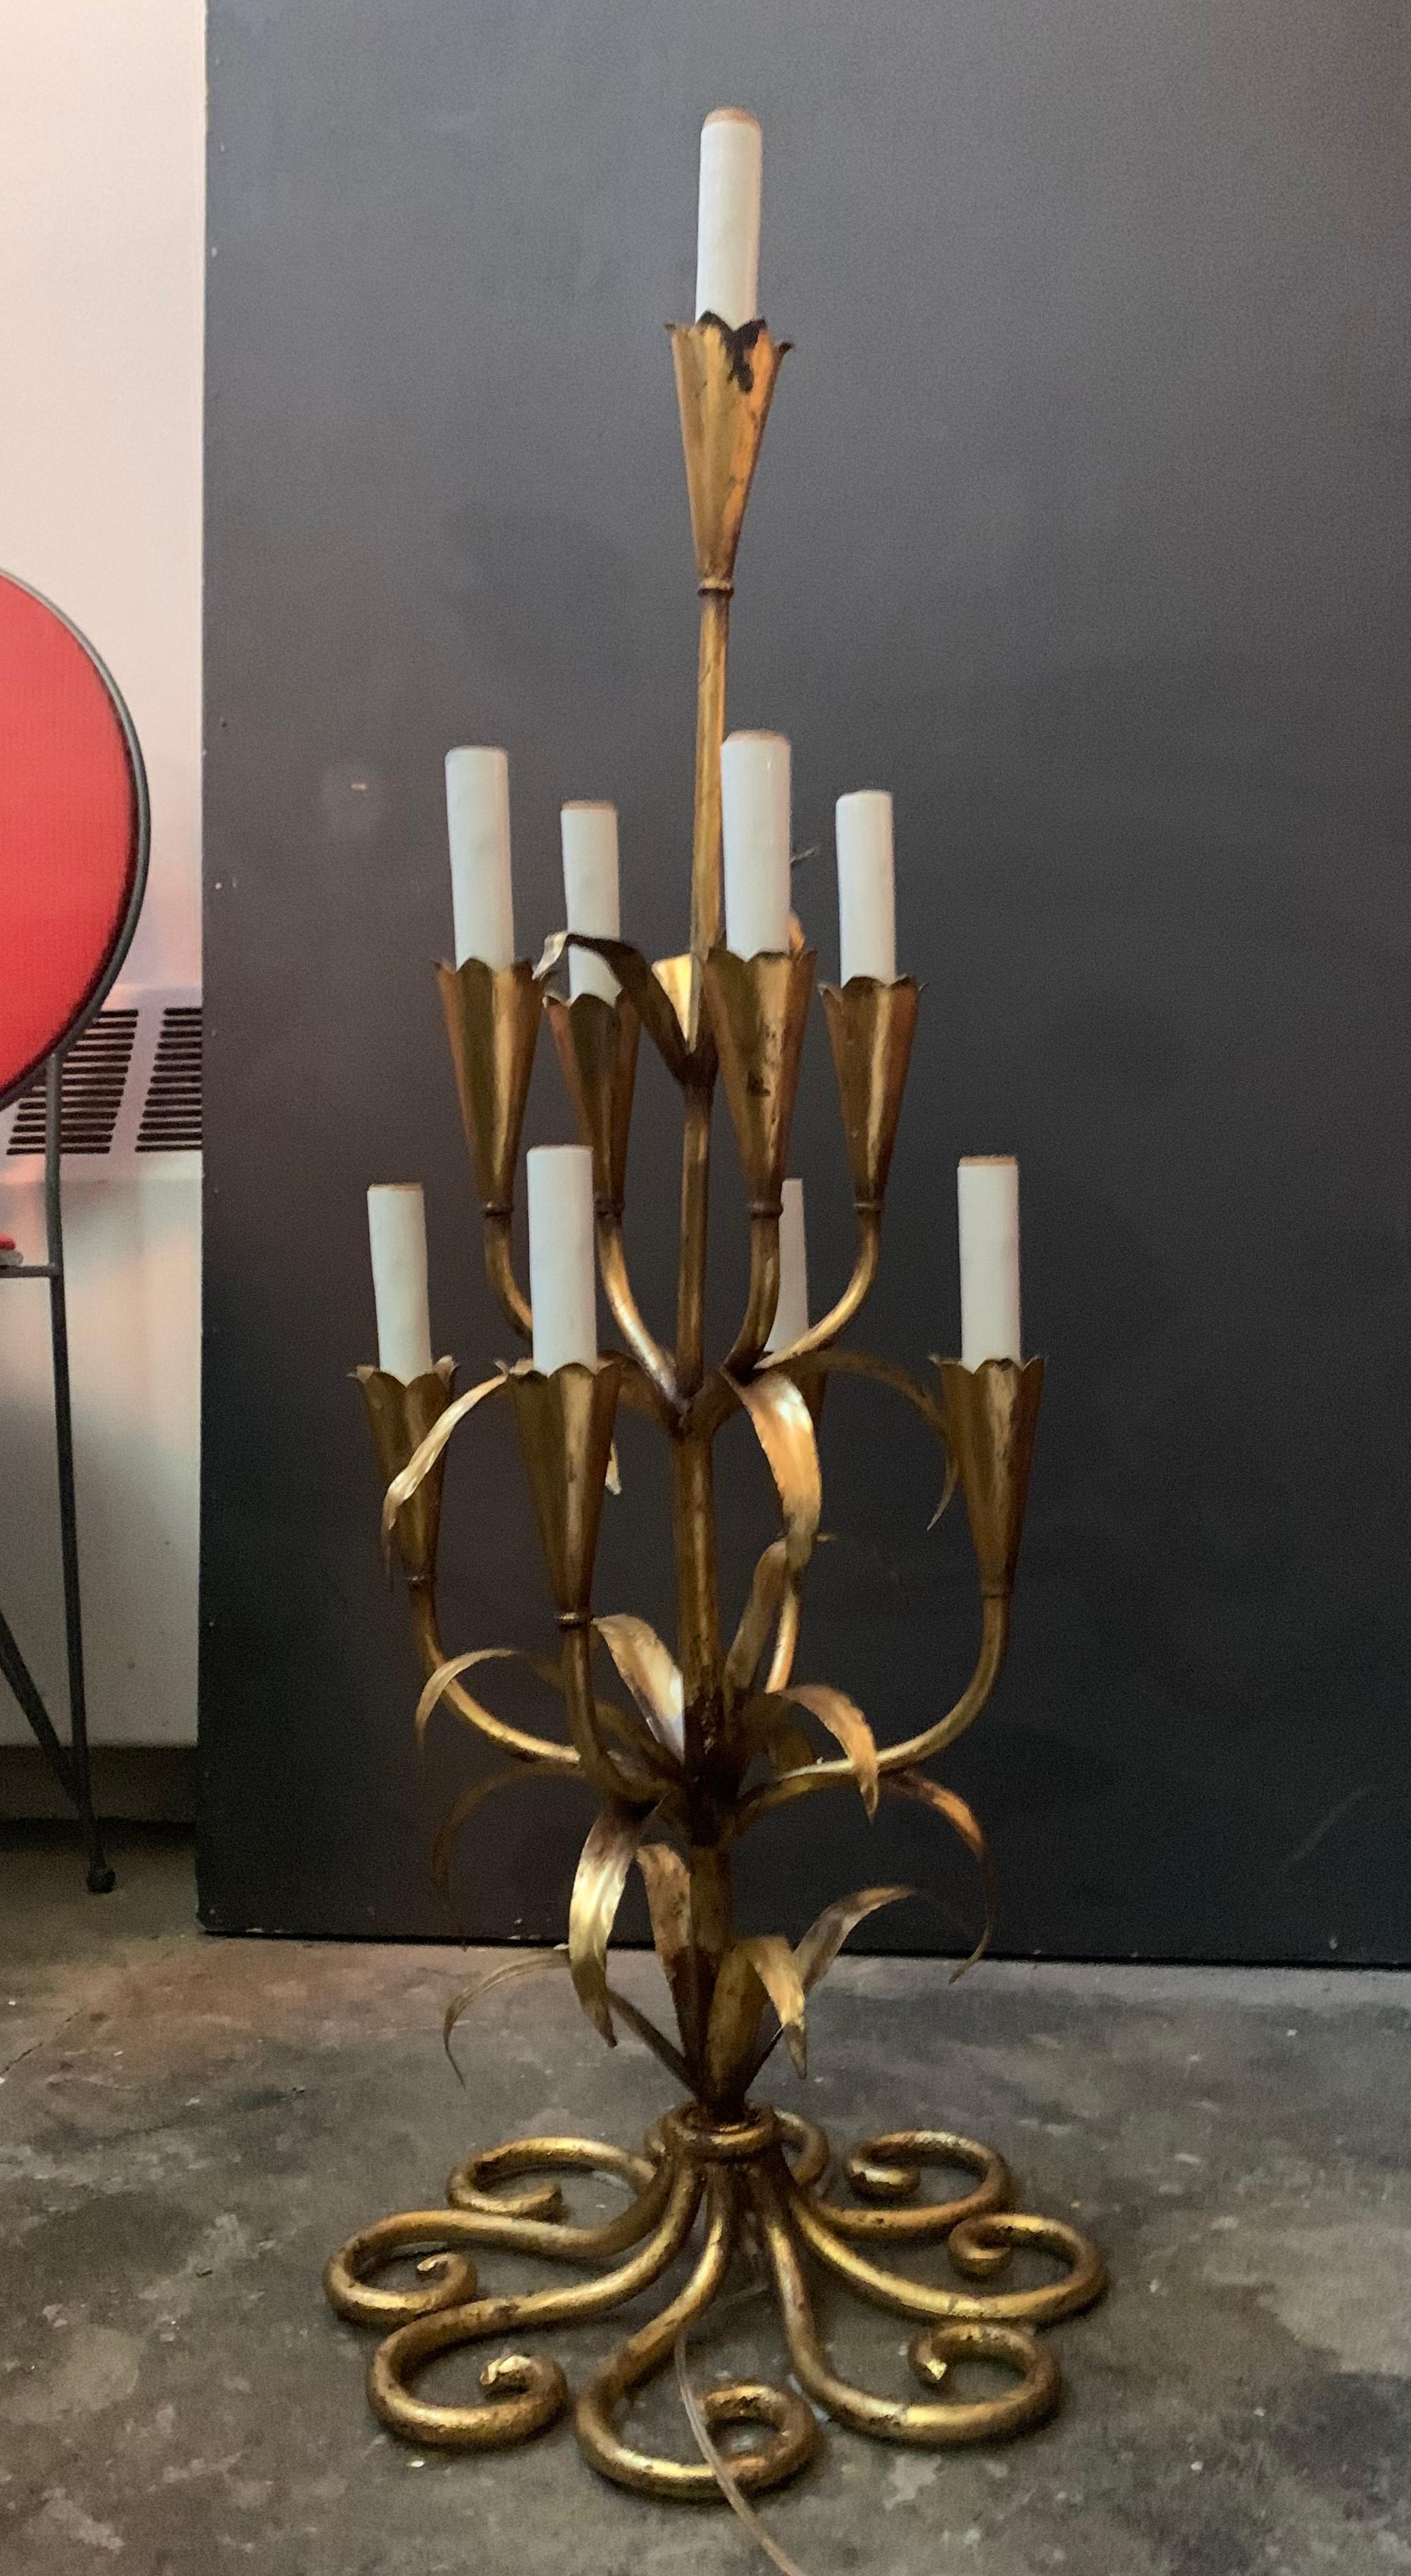 Gilt wrought iron foliate candelabra table or floor lamp. Hollywood Regency, midcentury electrified candelabra with ornate gilt wrought iron leaves and stems.